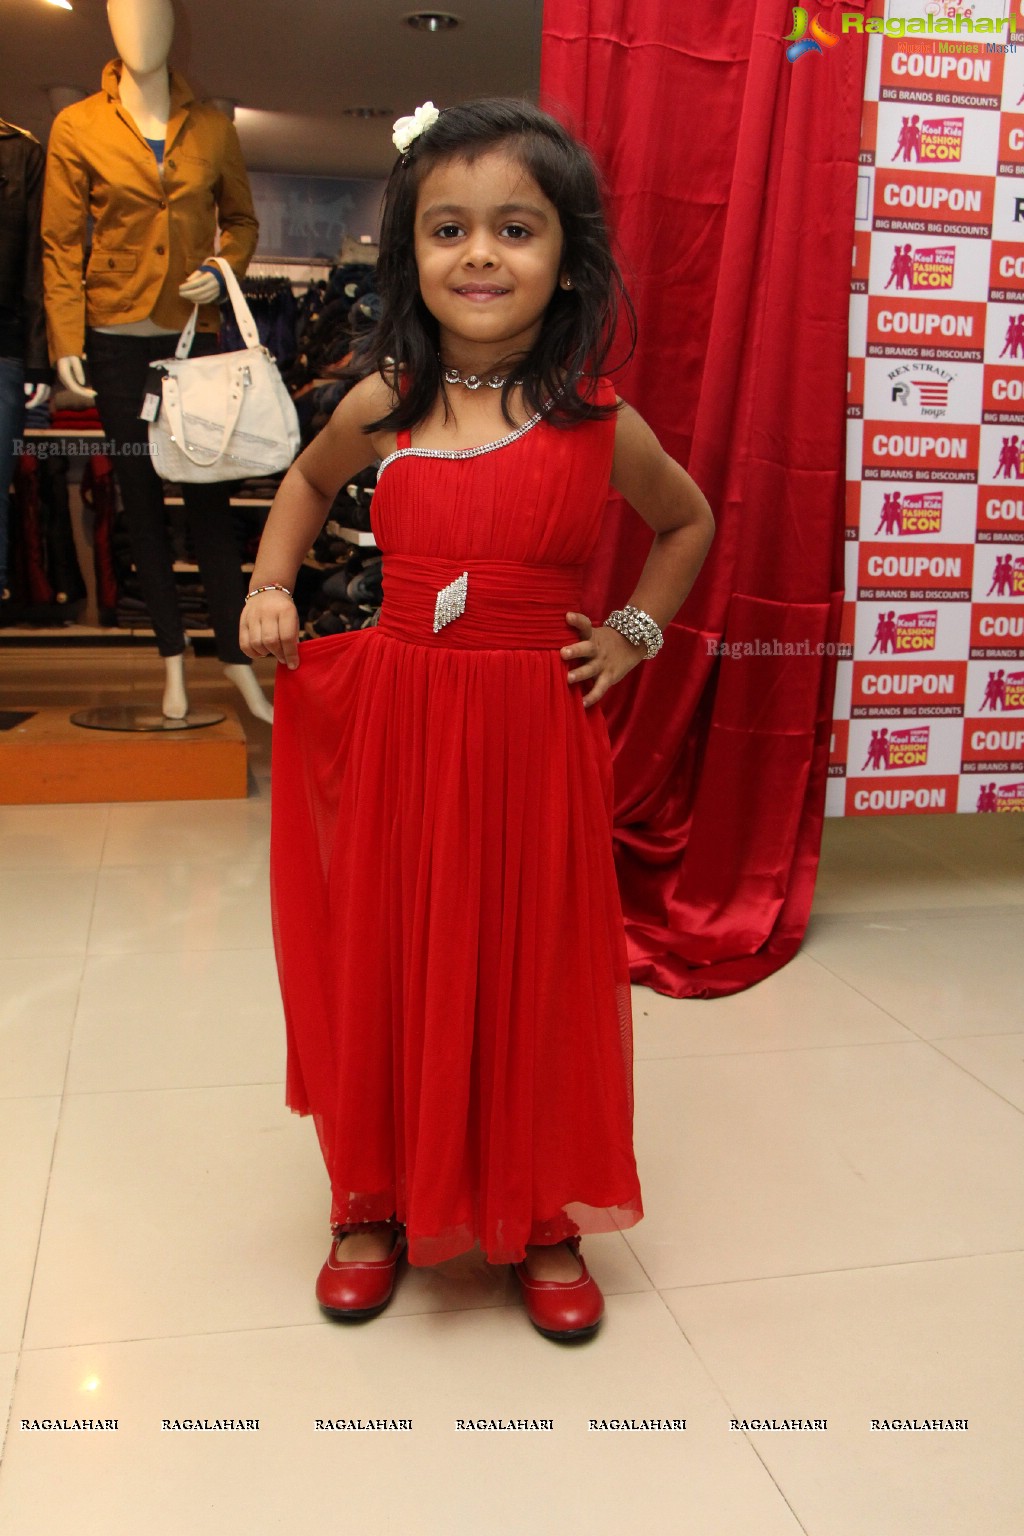 Coupon Launches Kool Kids Fashion Icon With Talented Tollywood Star Priyadarshini